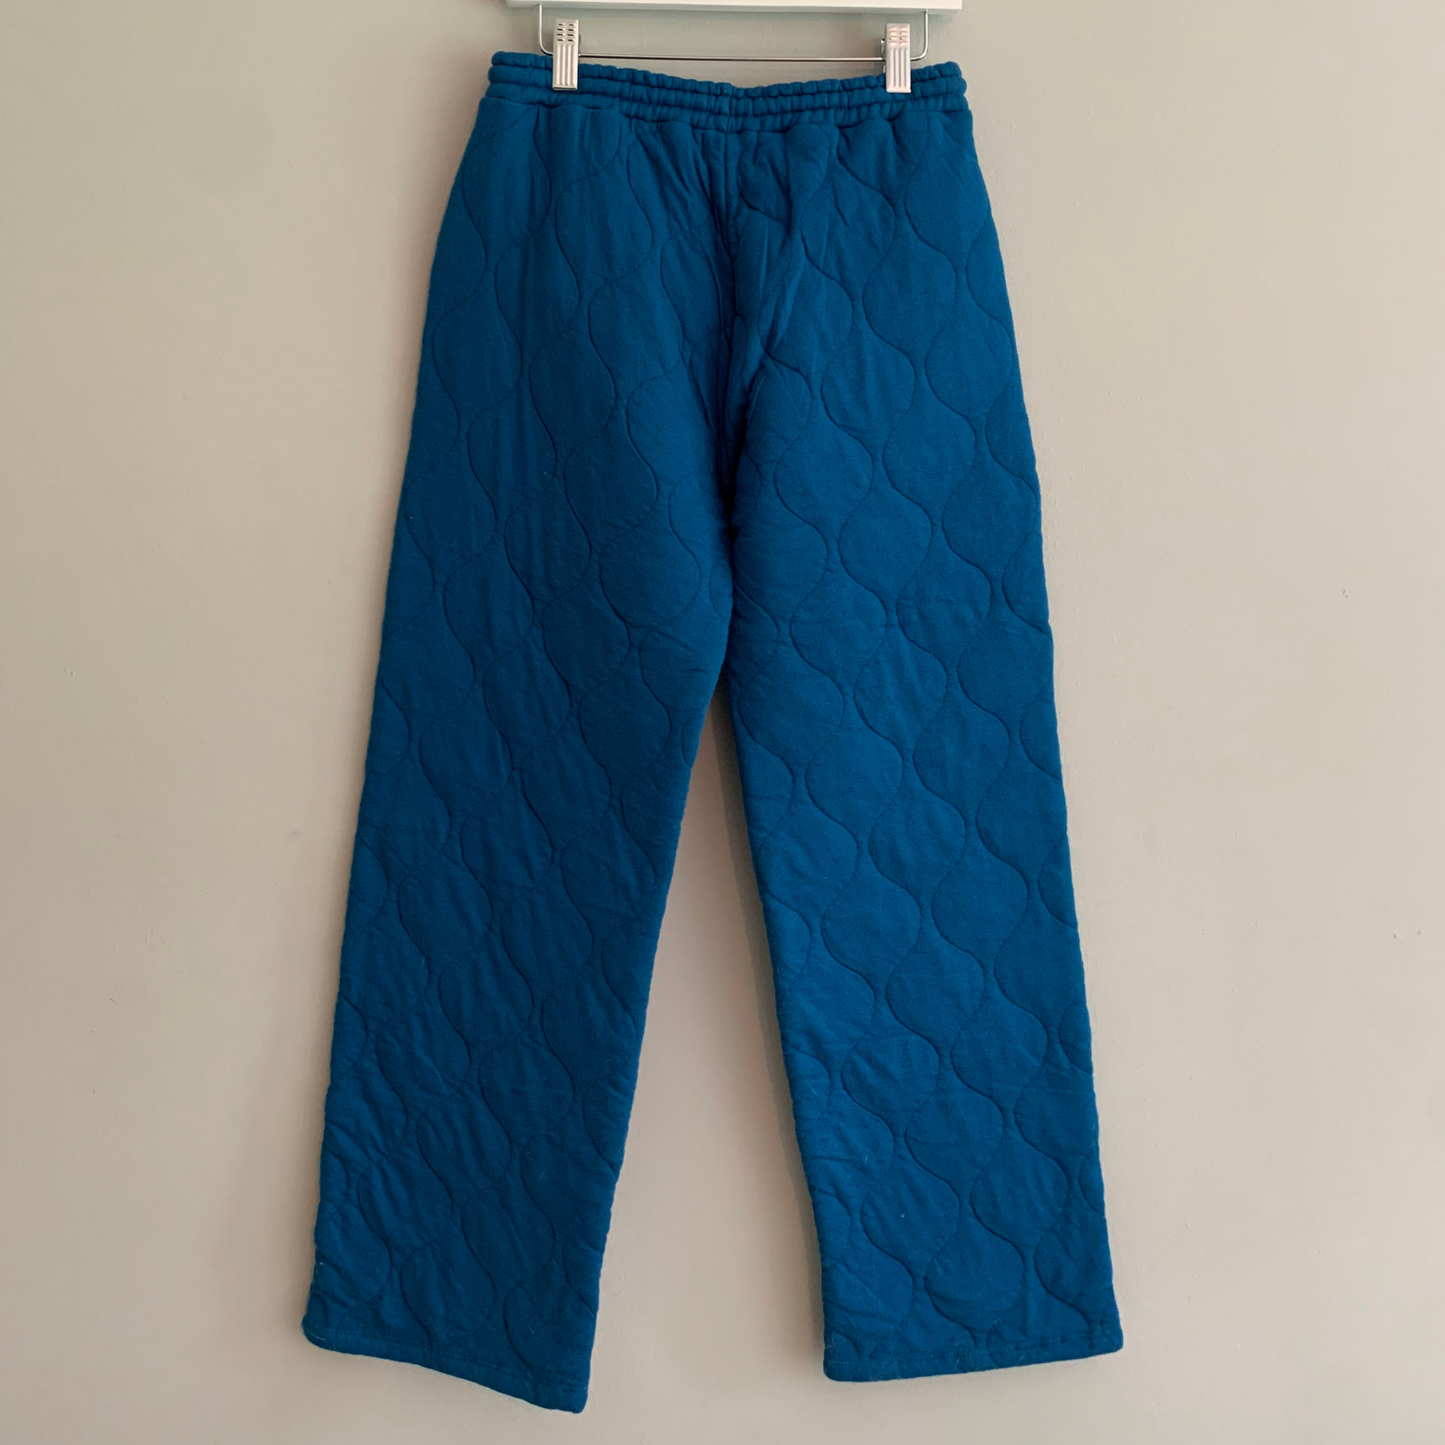 Blue Quilted Jogging Pants (New with Tags) - Size 12Y